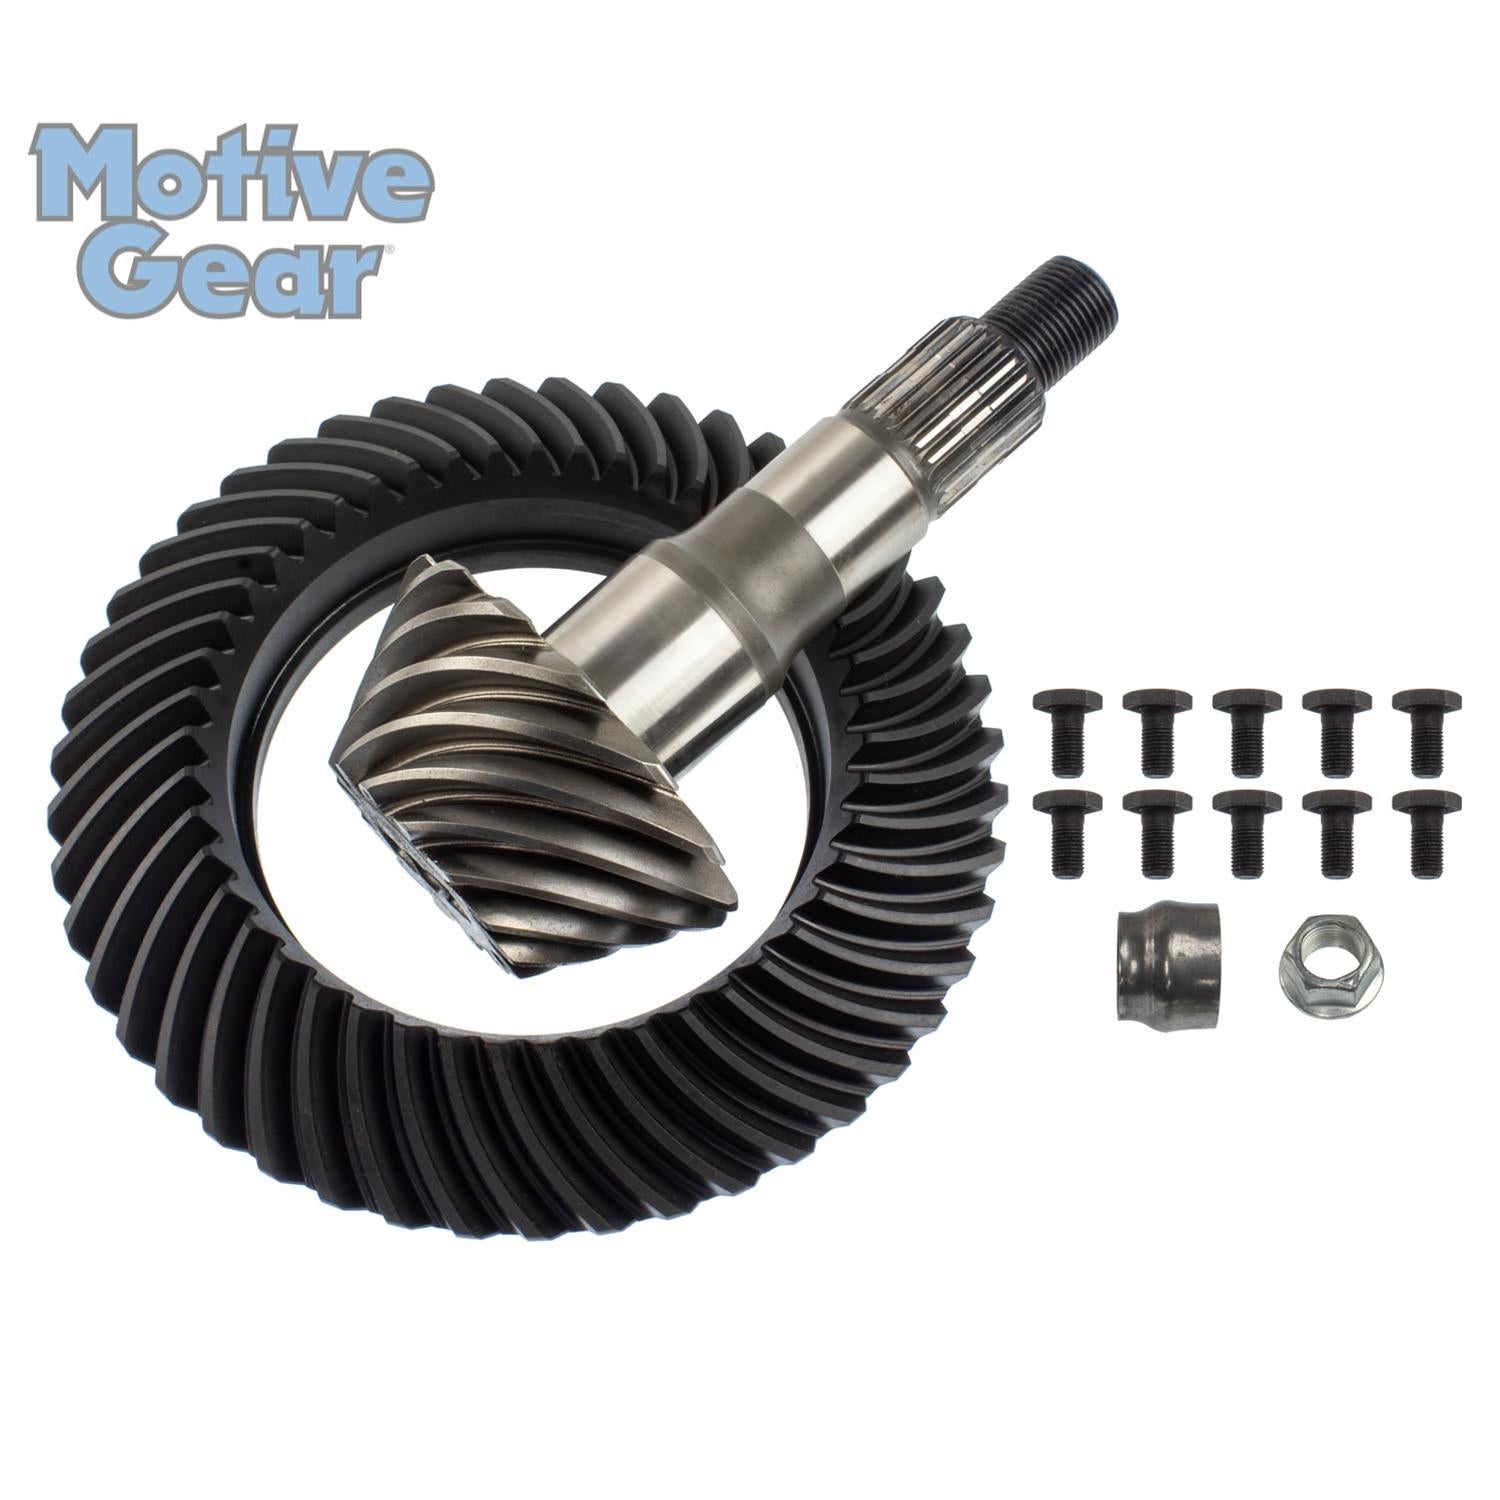 Motive Gear D205-336 3.36 Ratio Differential Ring and Pinion for 8.07 (Inch) (9 Bolt)